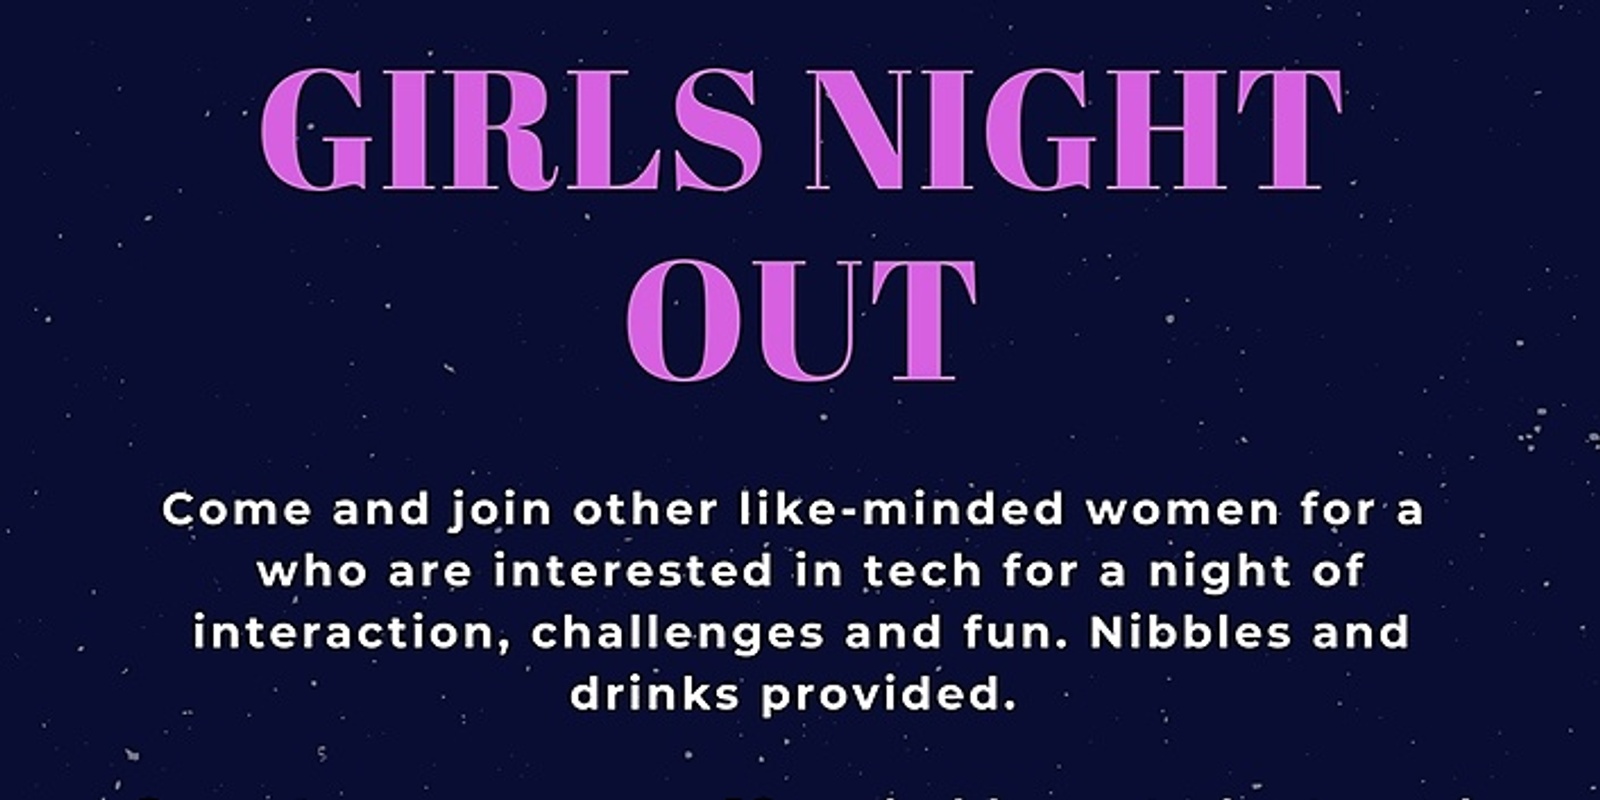 christian girls night out ideas